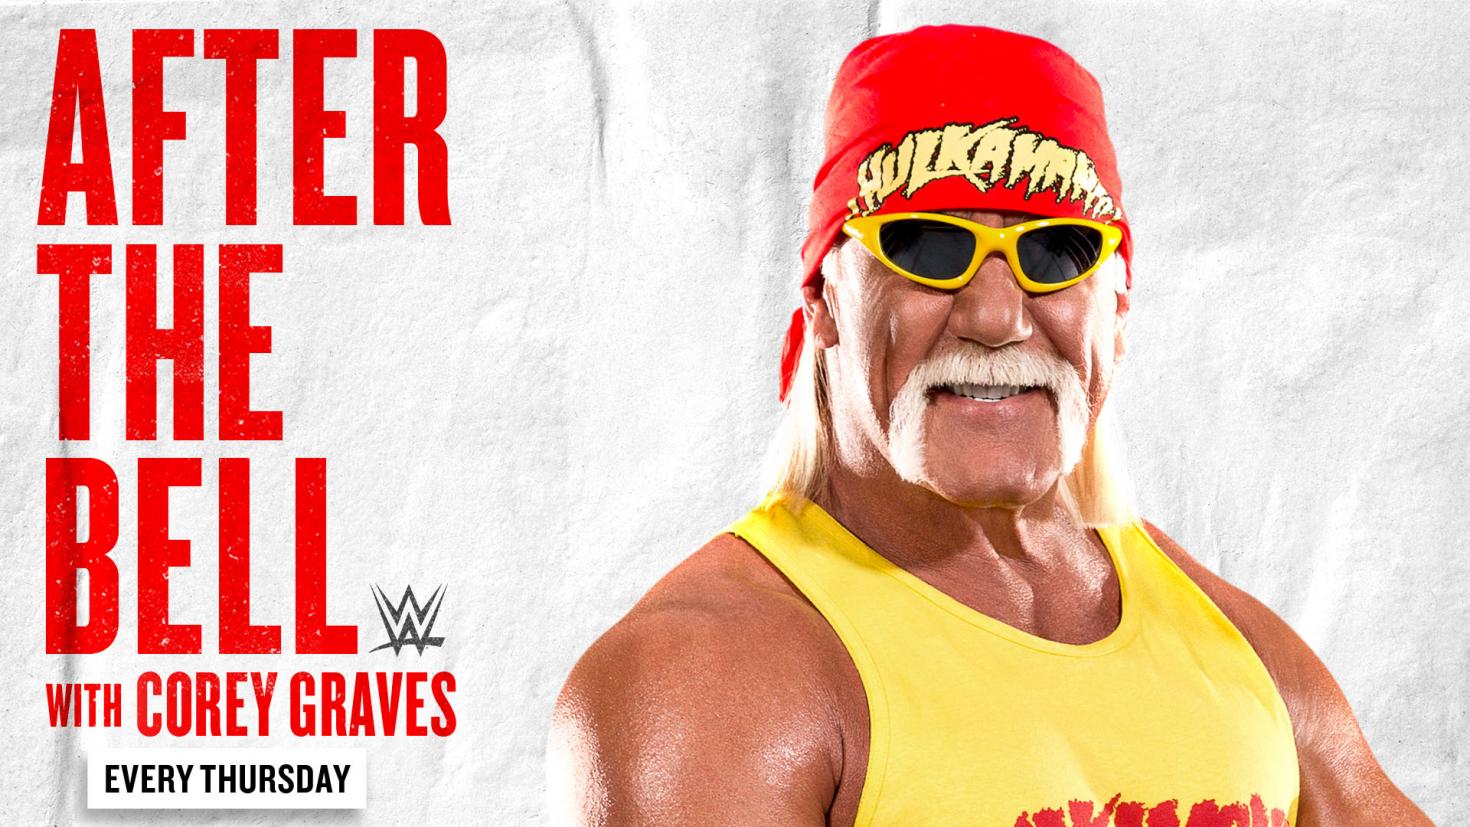 Wwe Legend And Wrestlemania Host Hulk Hogan Coming On Wwe After The Bell